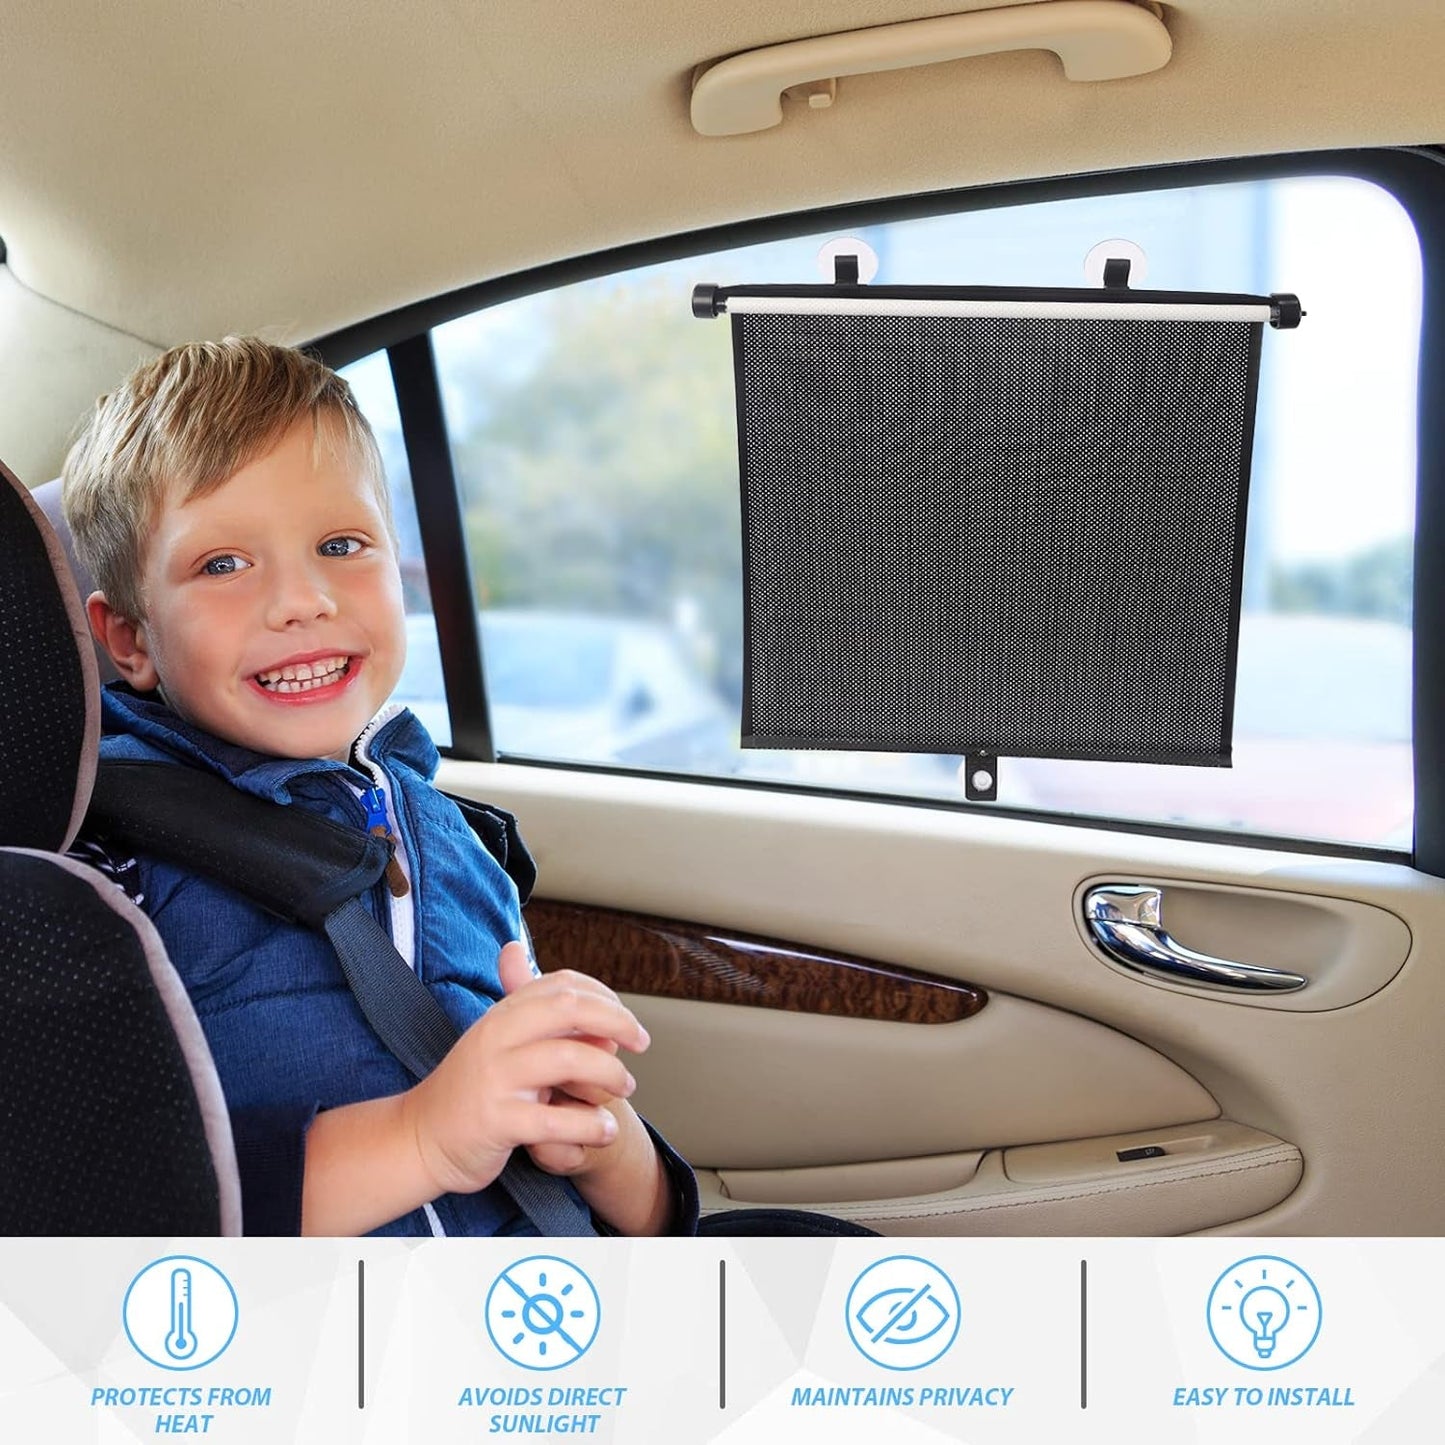 BOGI Car Window Shade (2 Pack) Car Roller Sunshade for Side Window,Car Sun Window Shade,Protect Baby,Kids and Pets from UV Rays Sun Glare,Suitable for Most Cars,Suv, Trucks,House and Office Window